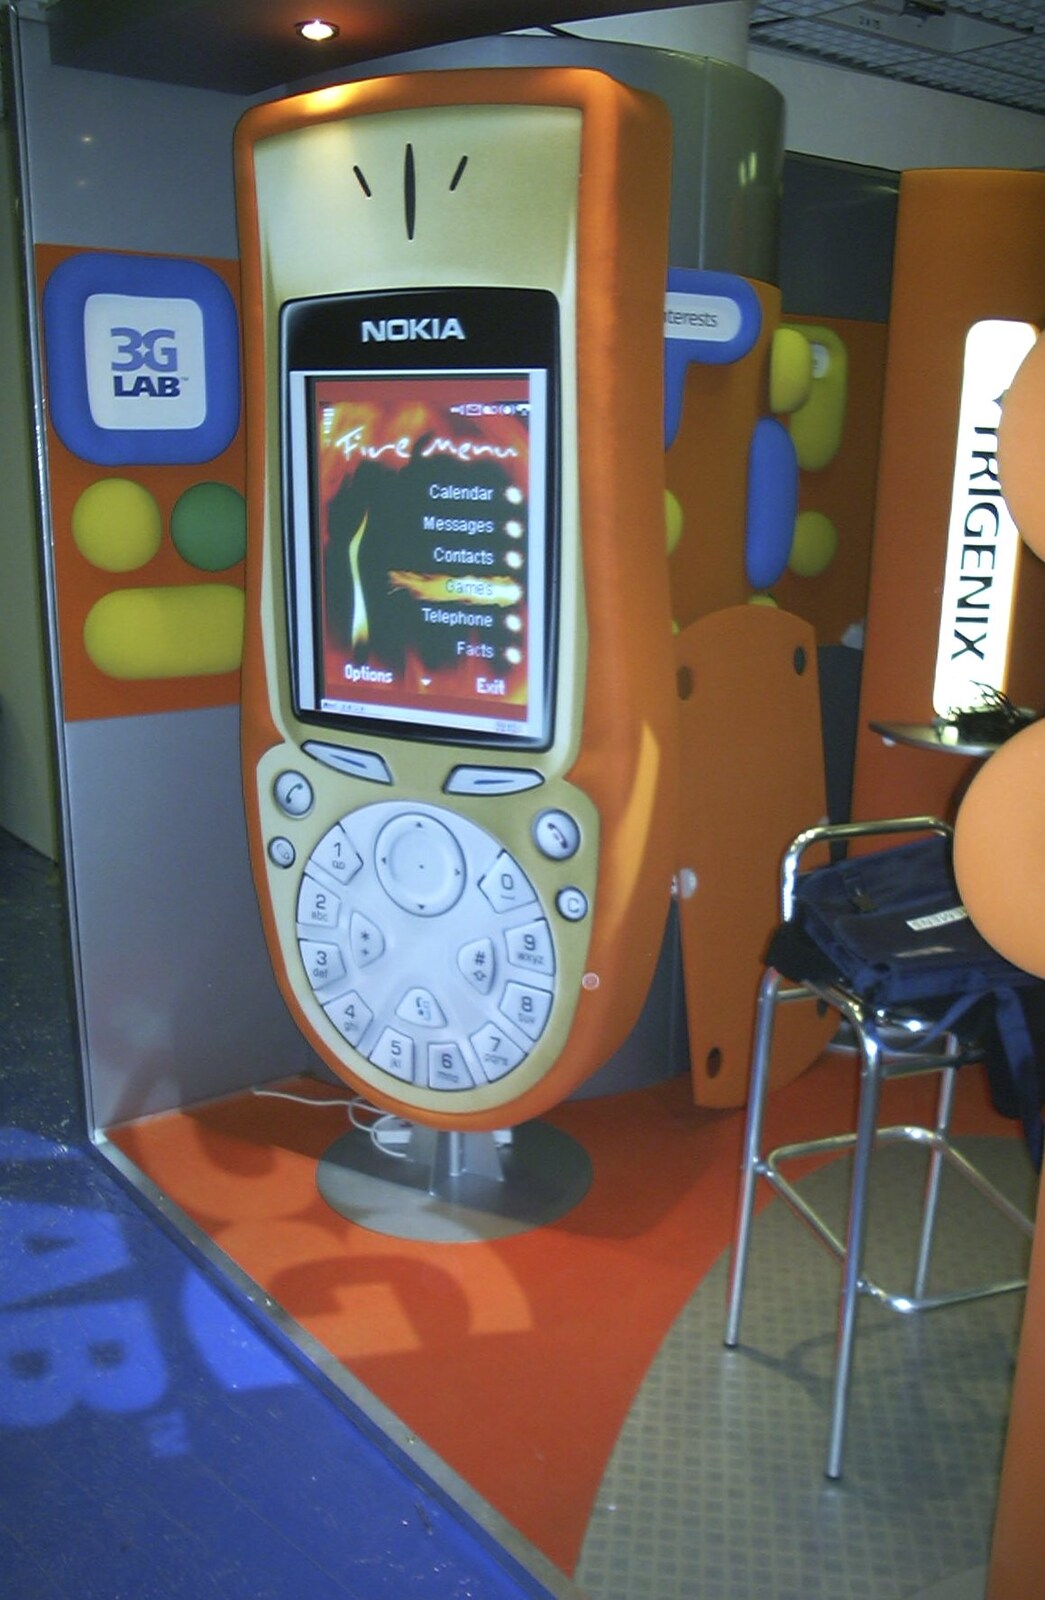 Another giant phone from 3G Lab at the 3GSM Conference, Cannes, France - 17th February 2003